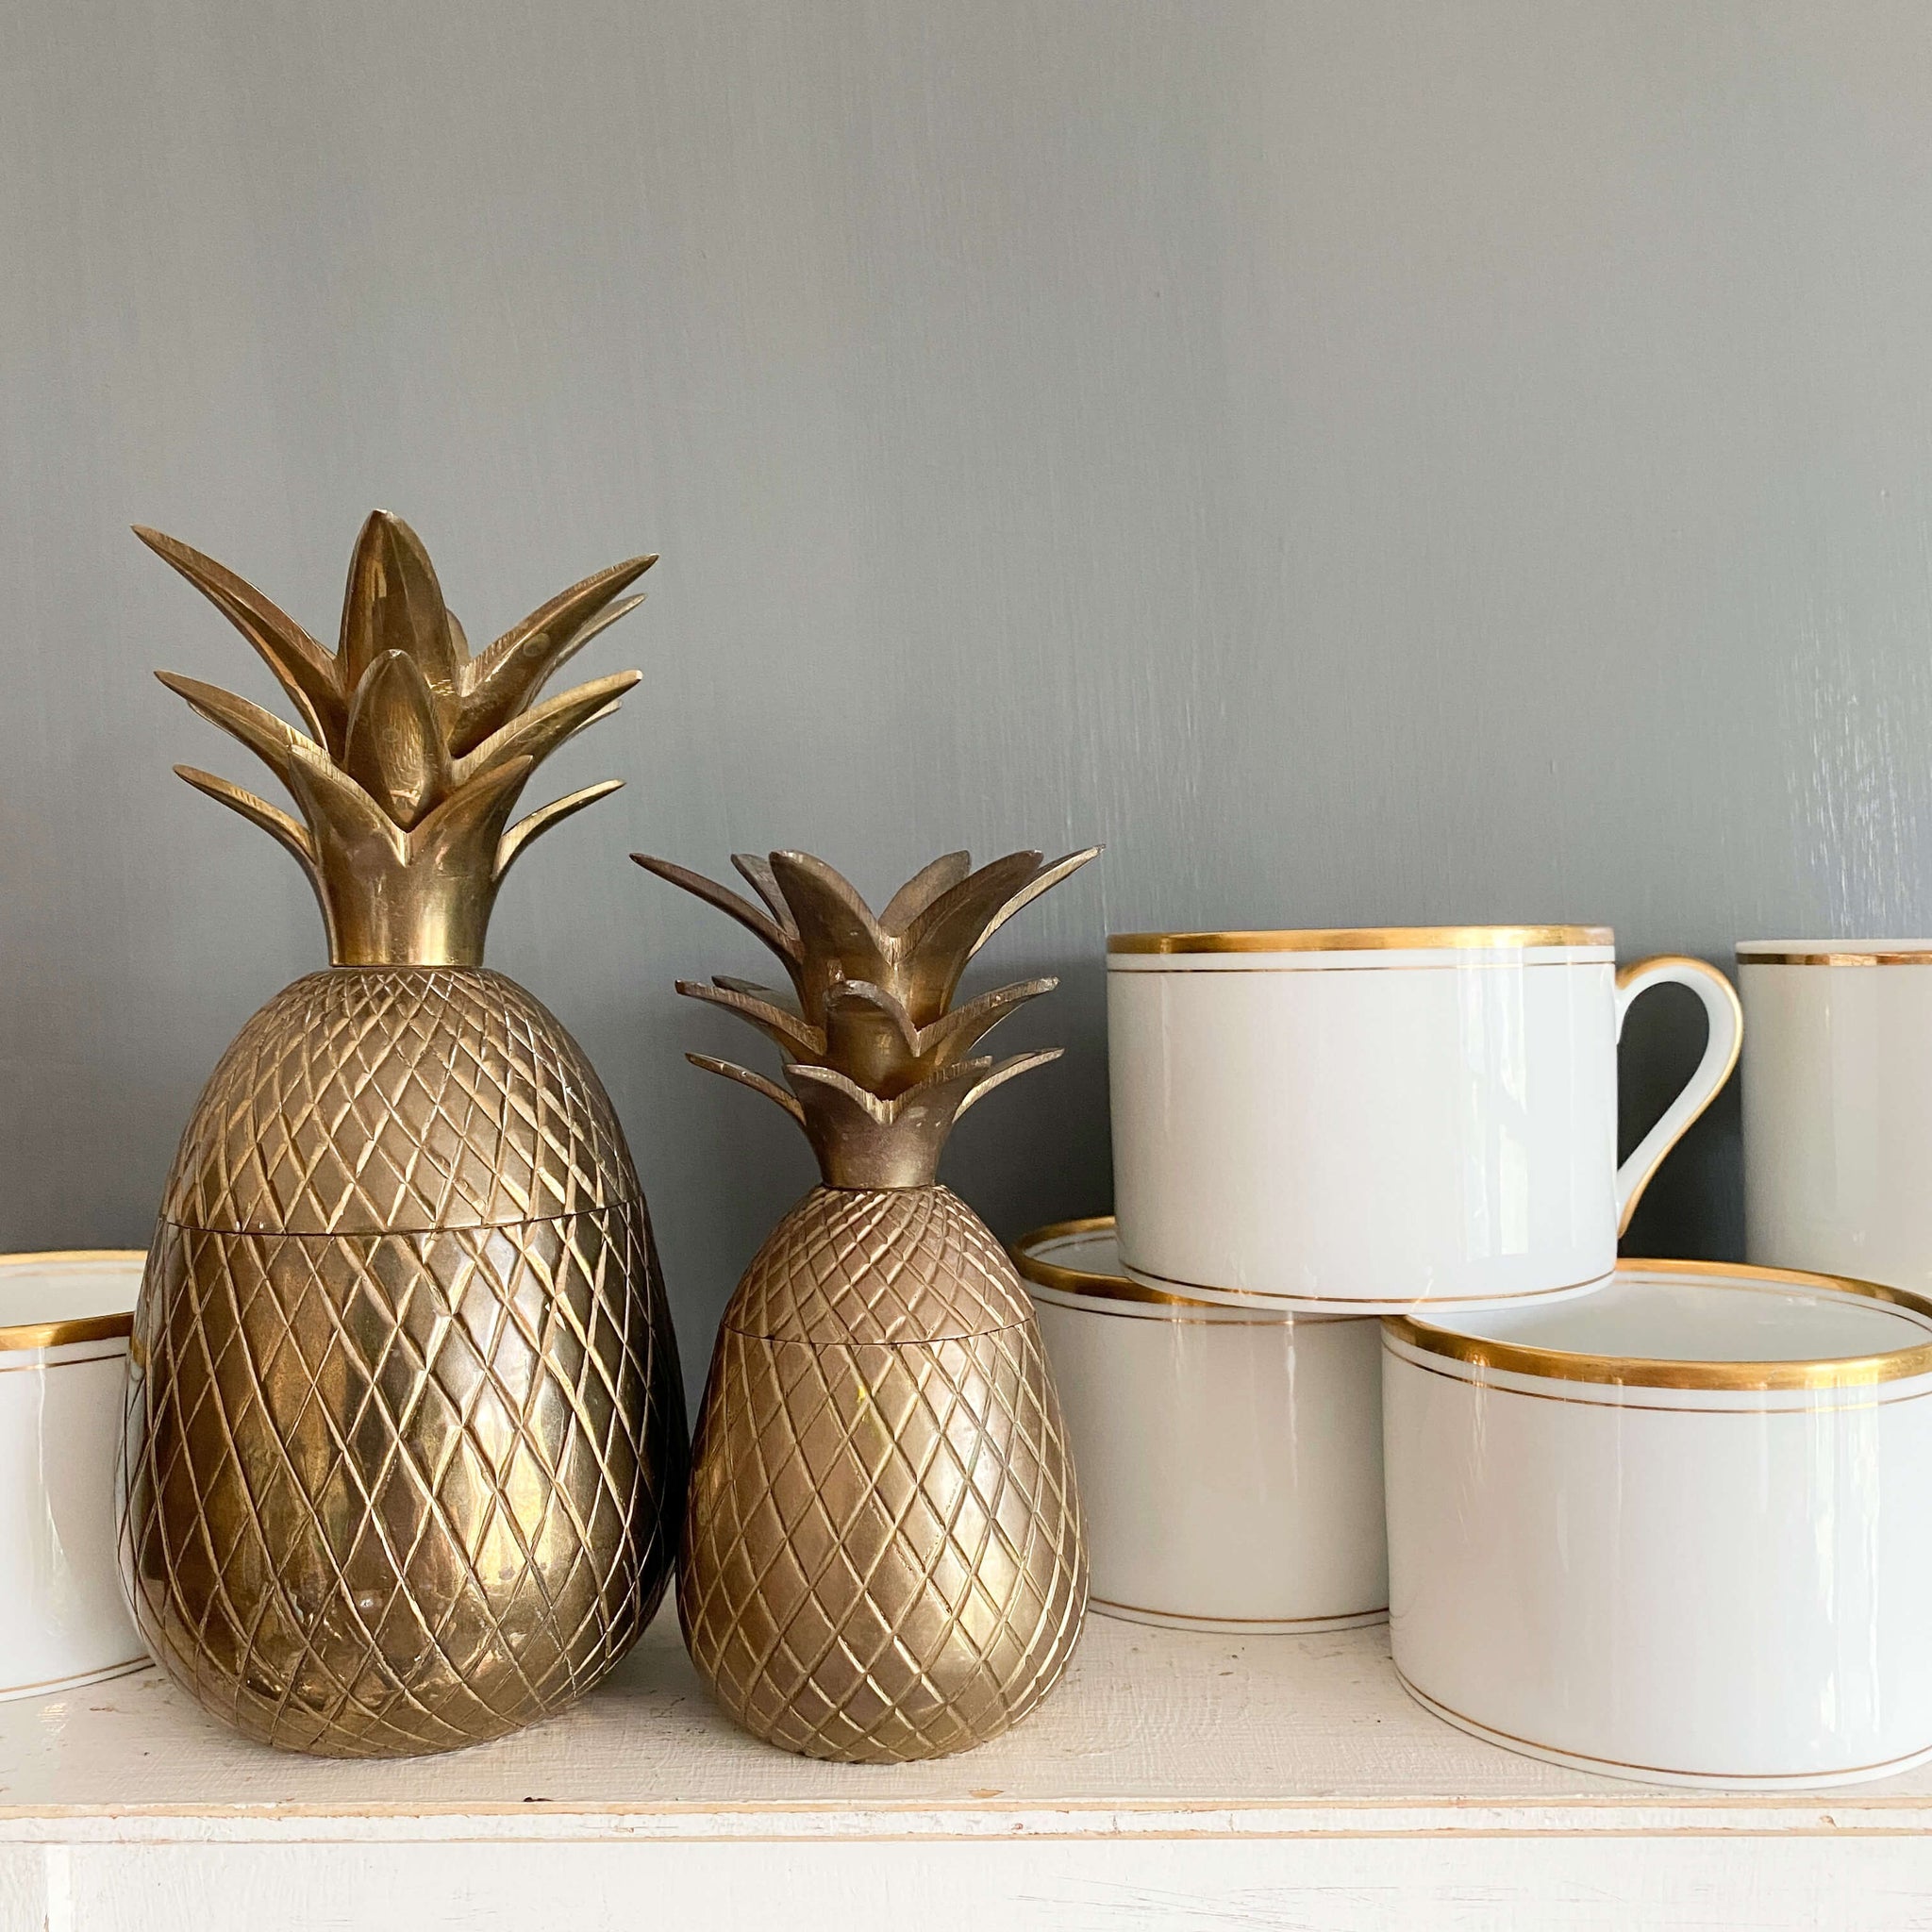 Vintage Brass PIneapple Storage Containers -Set of Two - Made in India